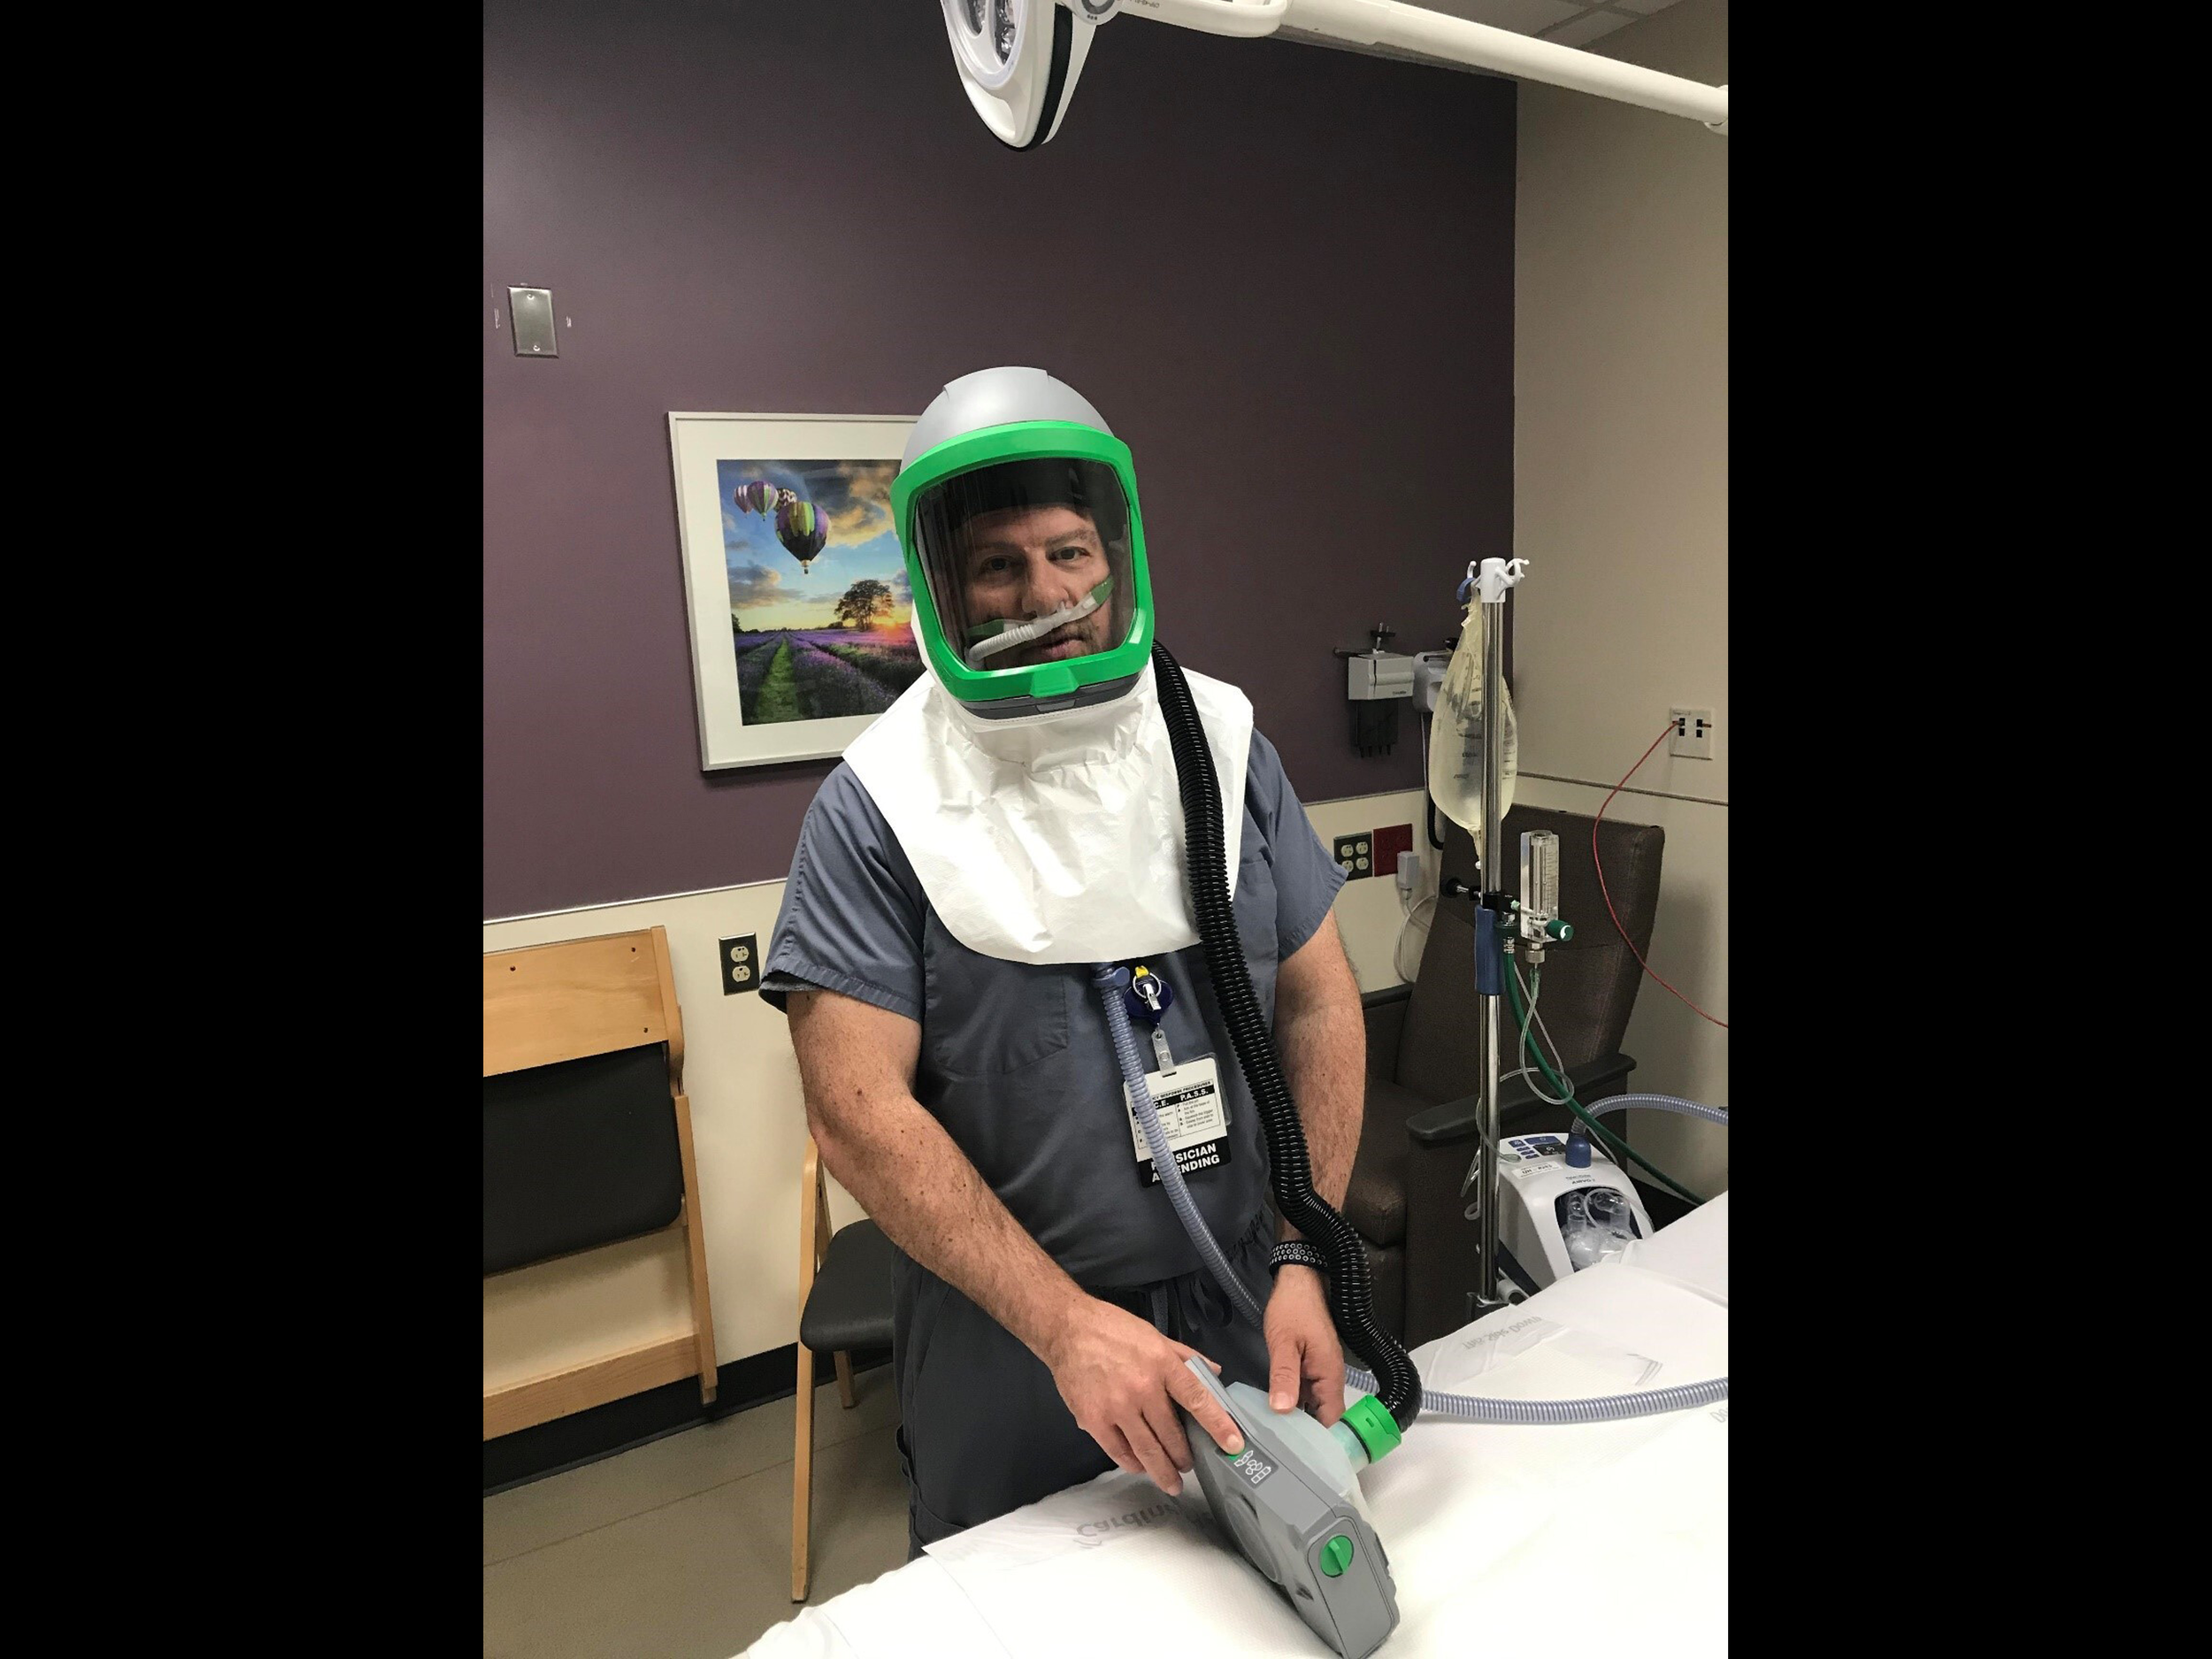  Healthy volunteer wearing the portable helmet negative pressure environment while on heated high flow nasal cannula, with HEPA filter and exhaust unit near bottom of image. The system draws oxygen, as well as room air, into the helmet, while pulling